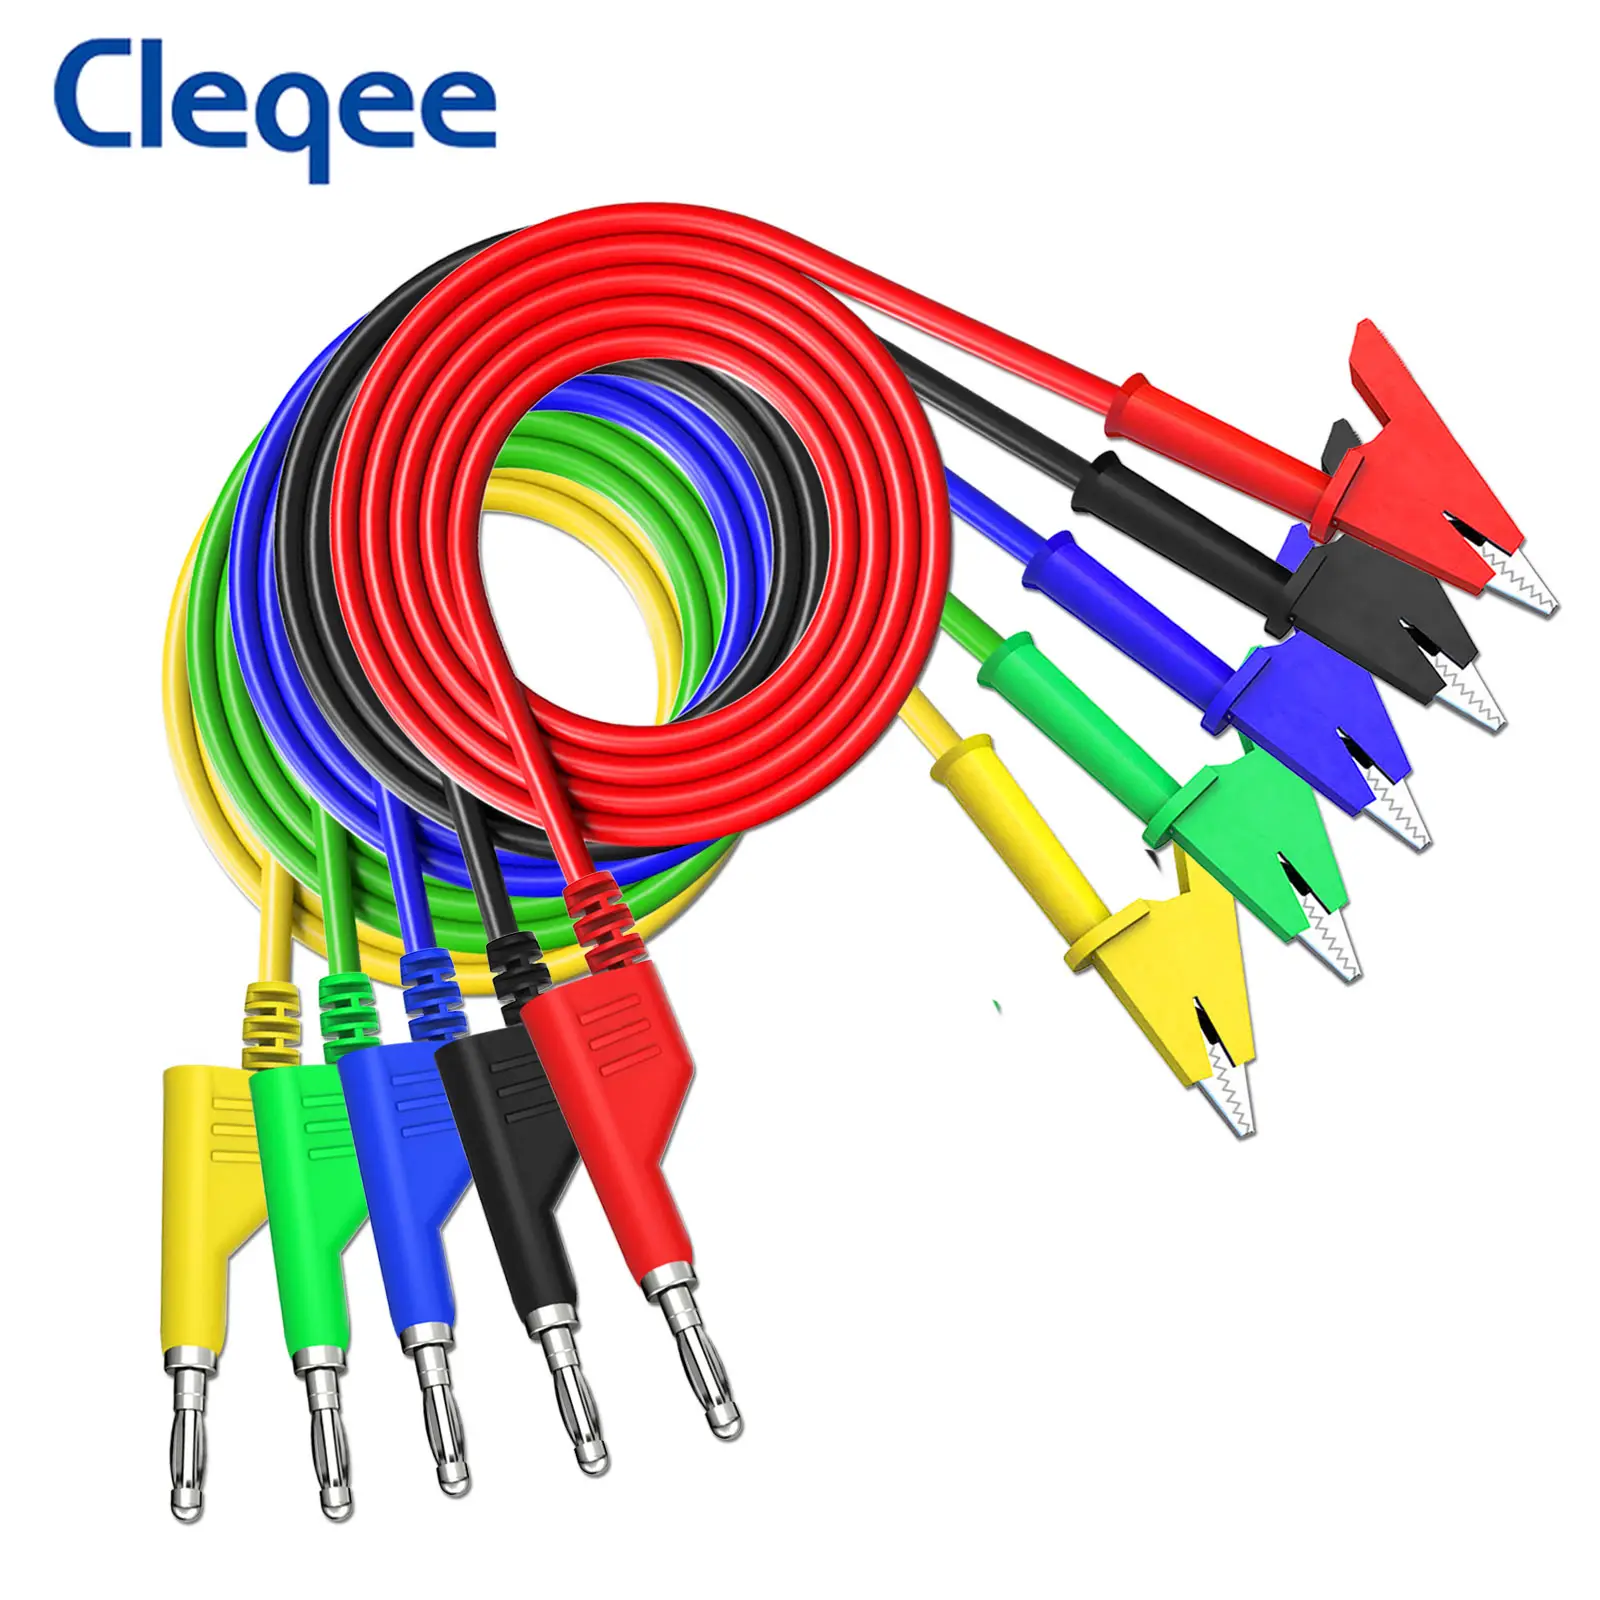 Cleqee P1037 5PCS 4mm Banana Plug to Alligator Clip Multimeter Test Lead Crocodile Clamps Cable 1M Wire 1000V/15A